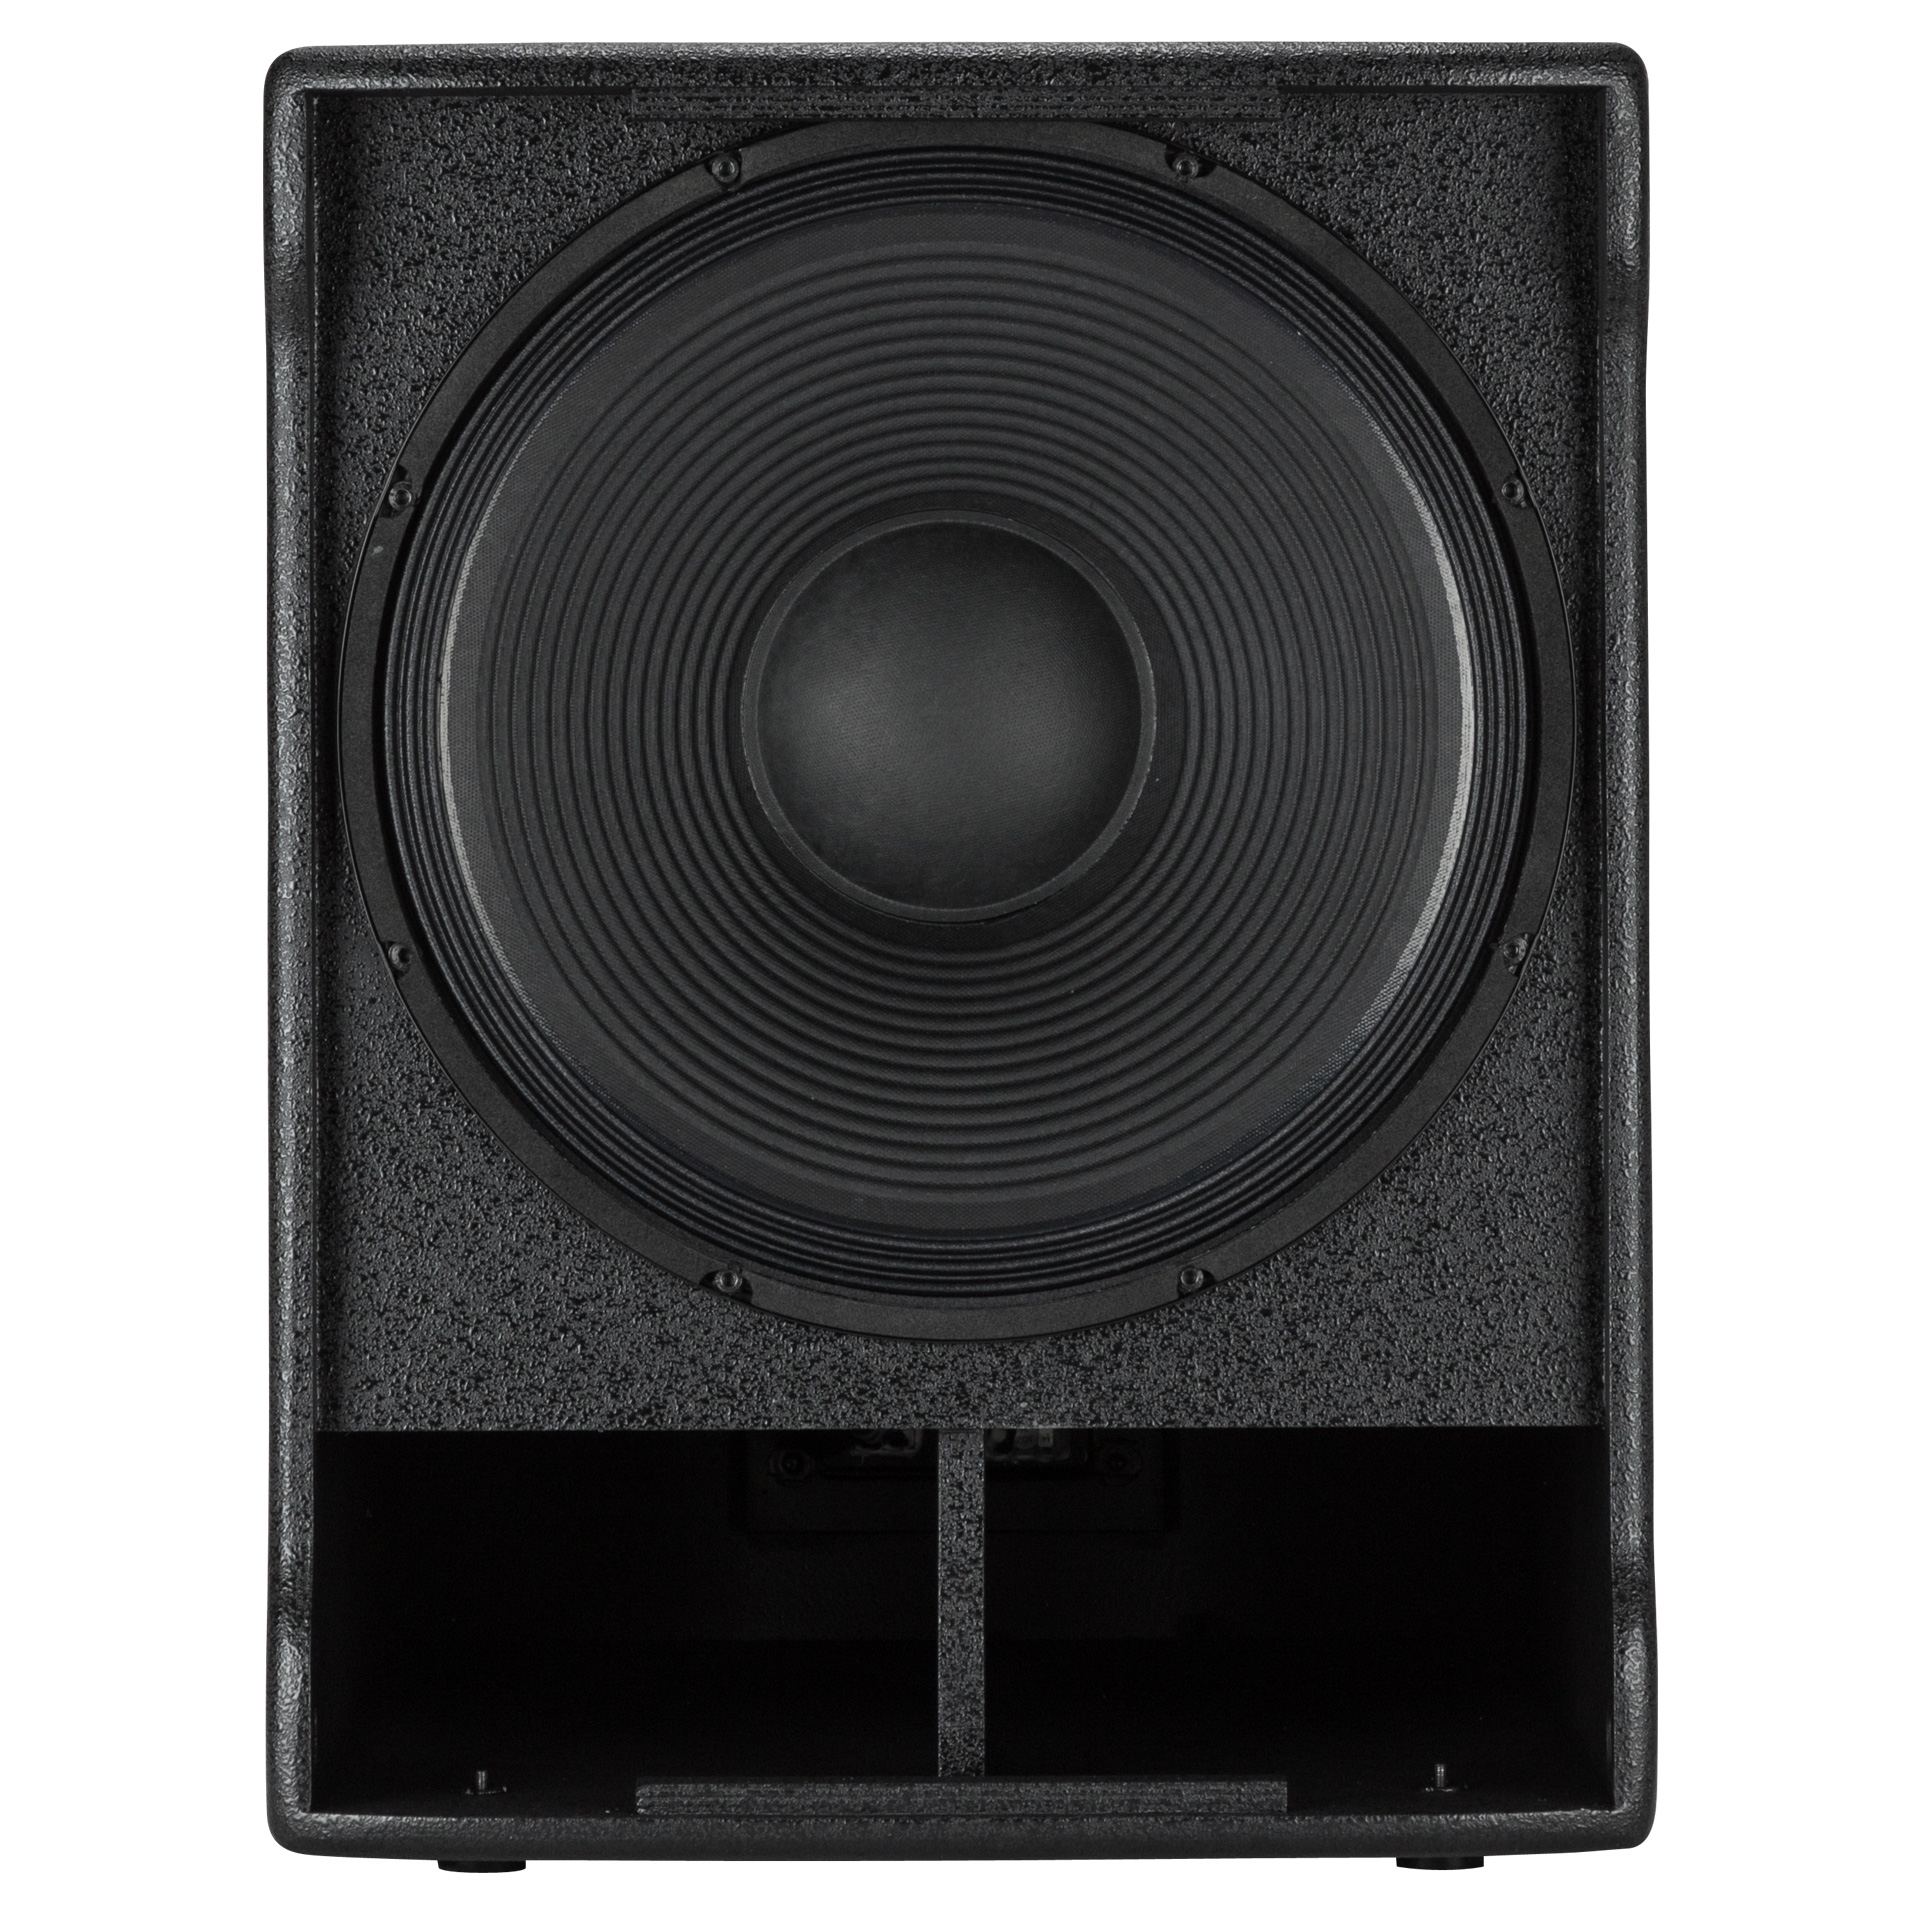 Rcf Sub 705-as Ii - Actieve subwoofer - Variation 2